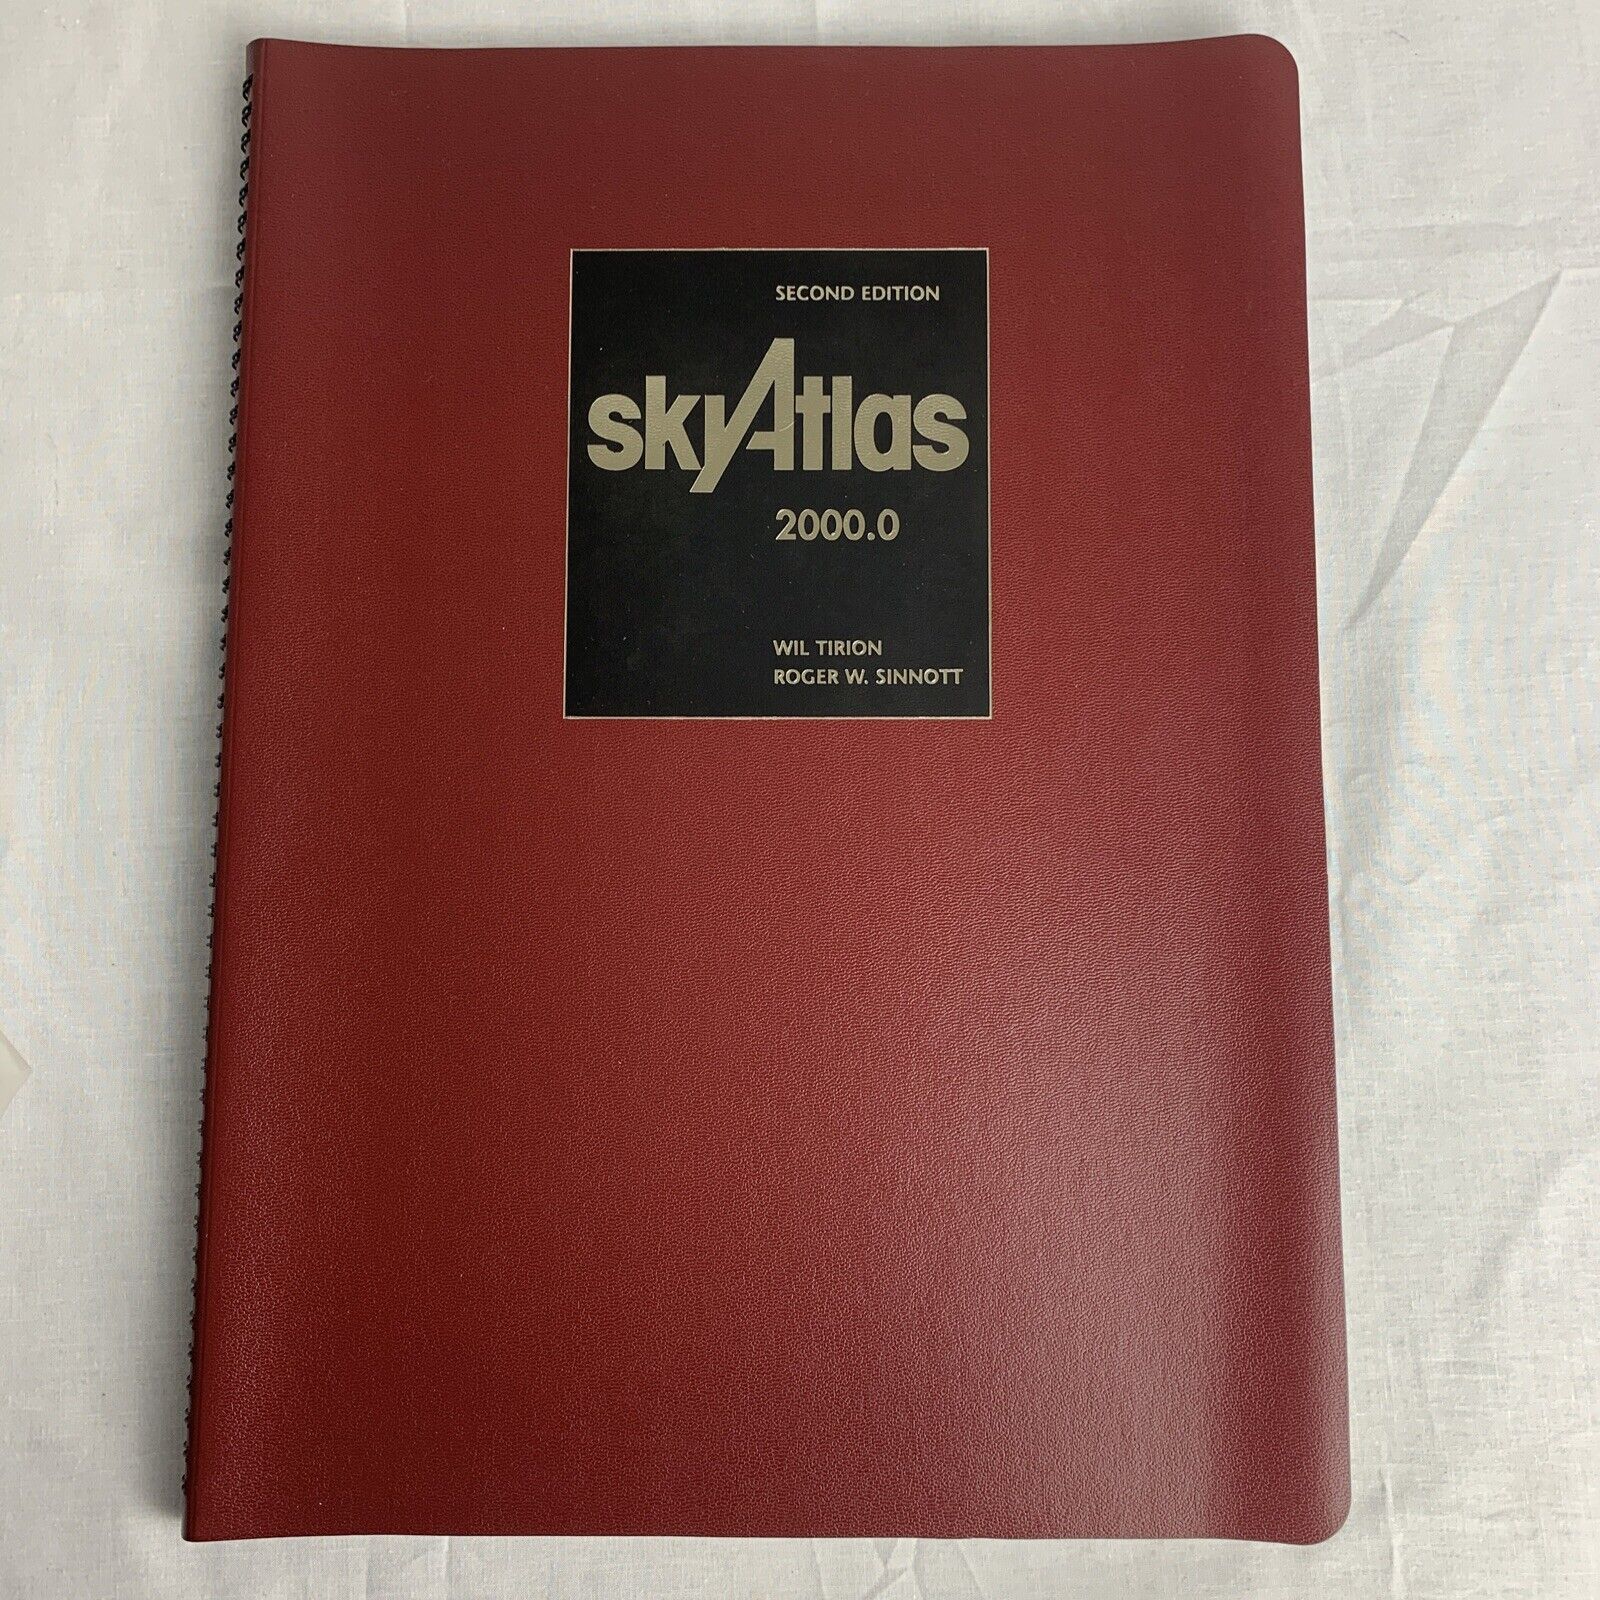 Sky Atlas 2000.0 2ed Second Deluxe Edition by Roger W. Sinnott & Wil Tirion, New